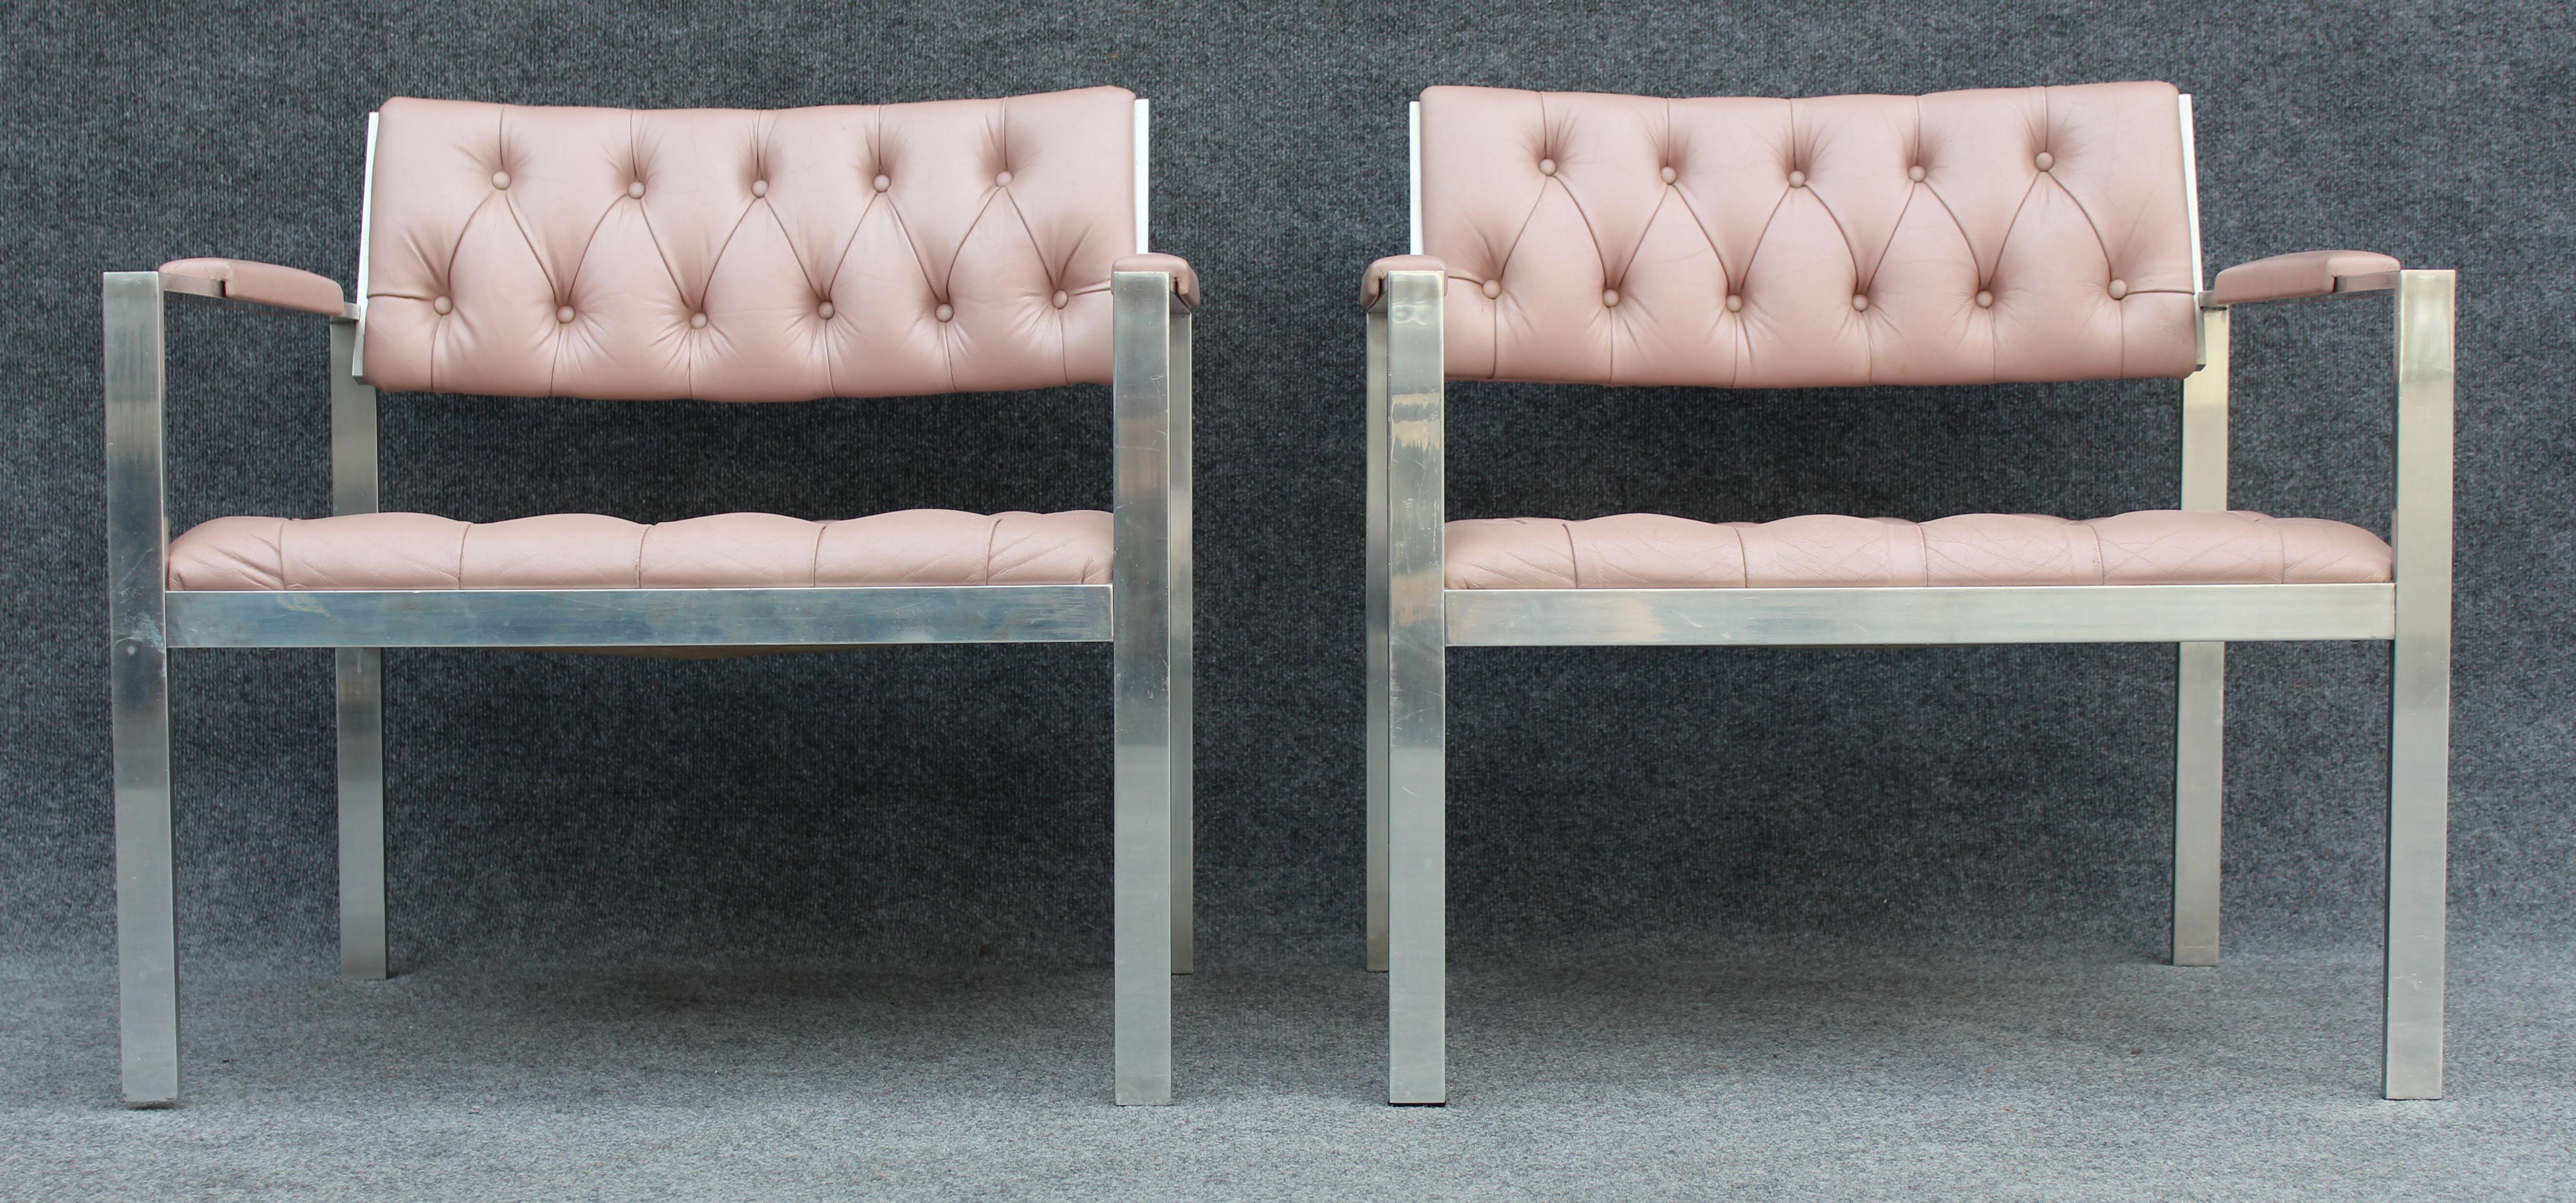 Pair of Rare Harvey Probber Polished Aluminum & Pink Leather Lounge Chairs 1970s For Sale 2